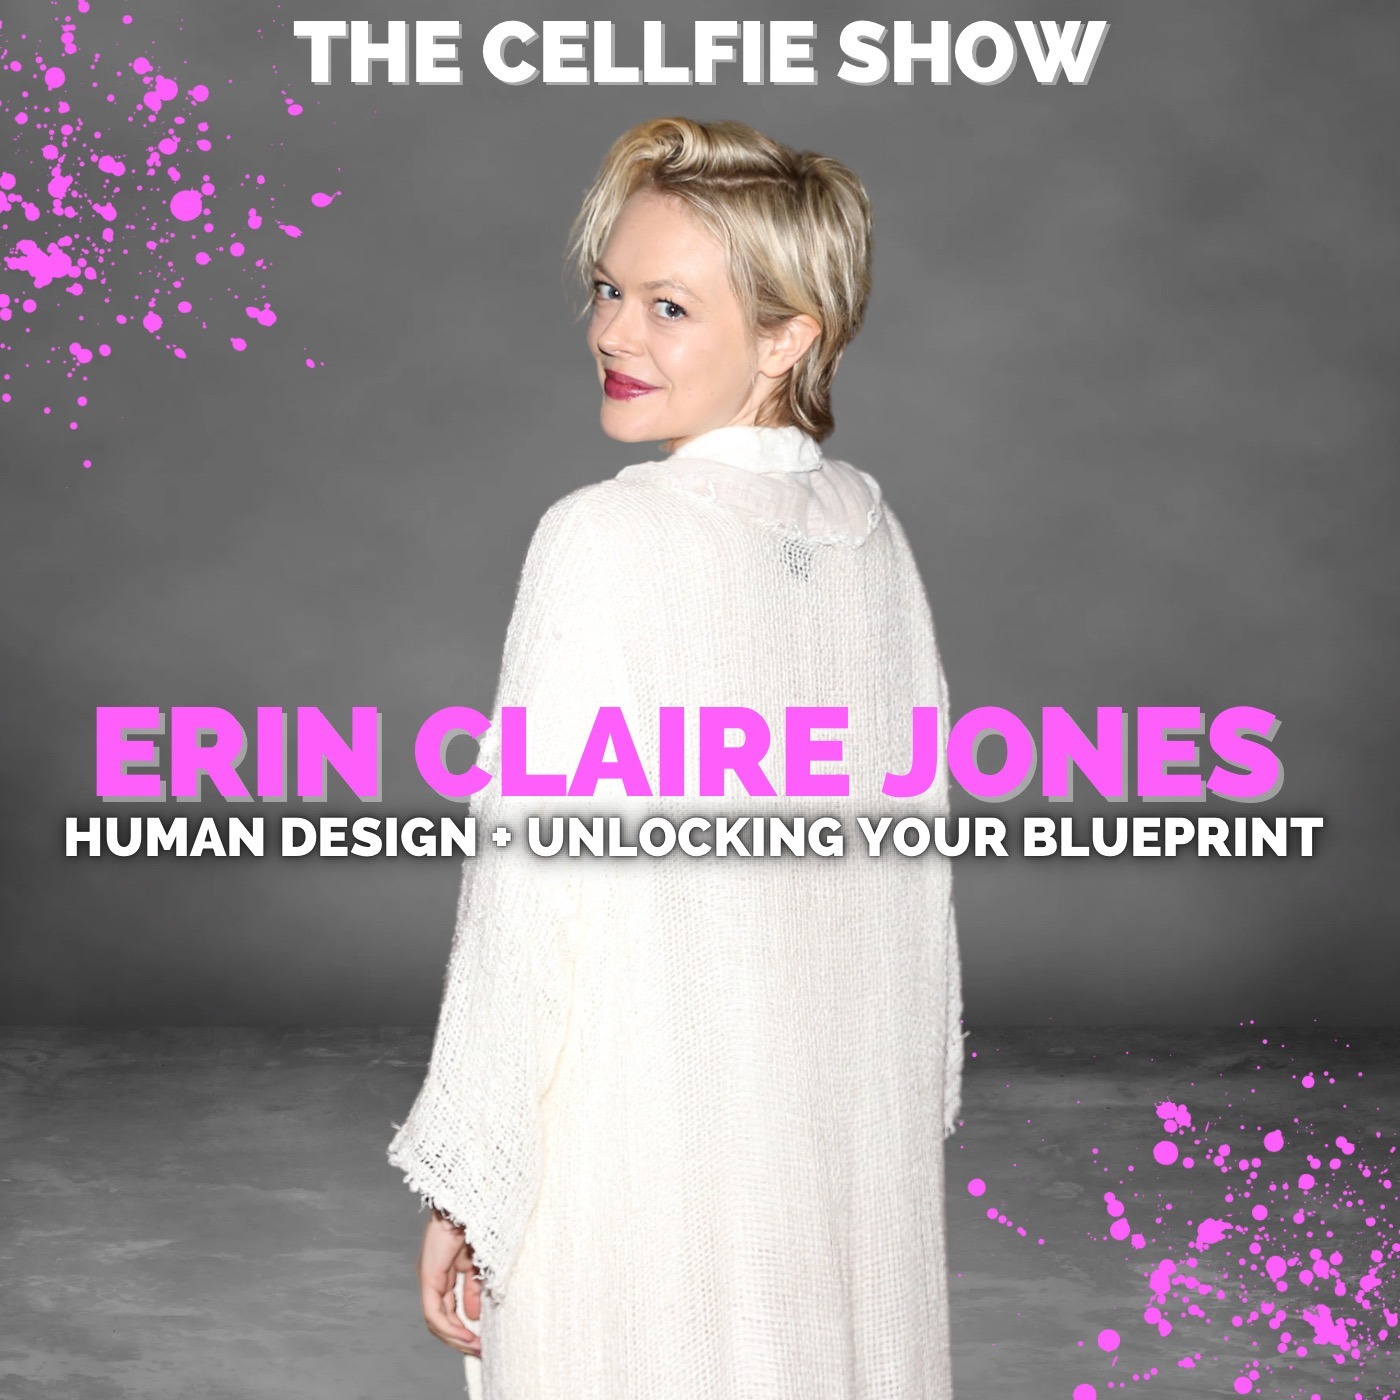 Human Design + Unlocking Your BluePrint with Erin Claire Jones. Discover Your Unique Gifts, Talents, & Strengths